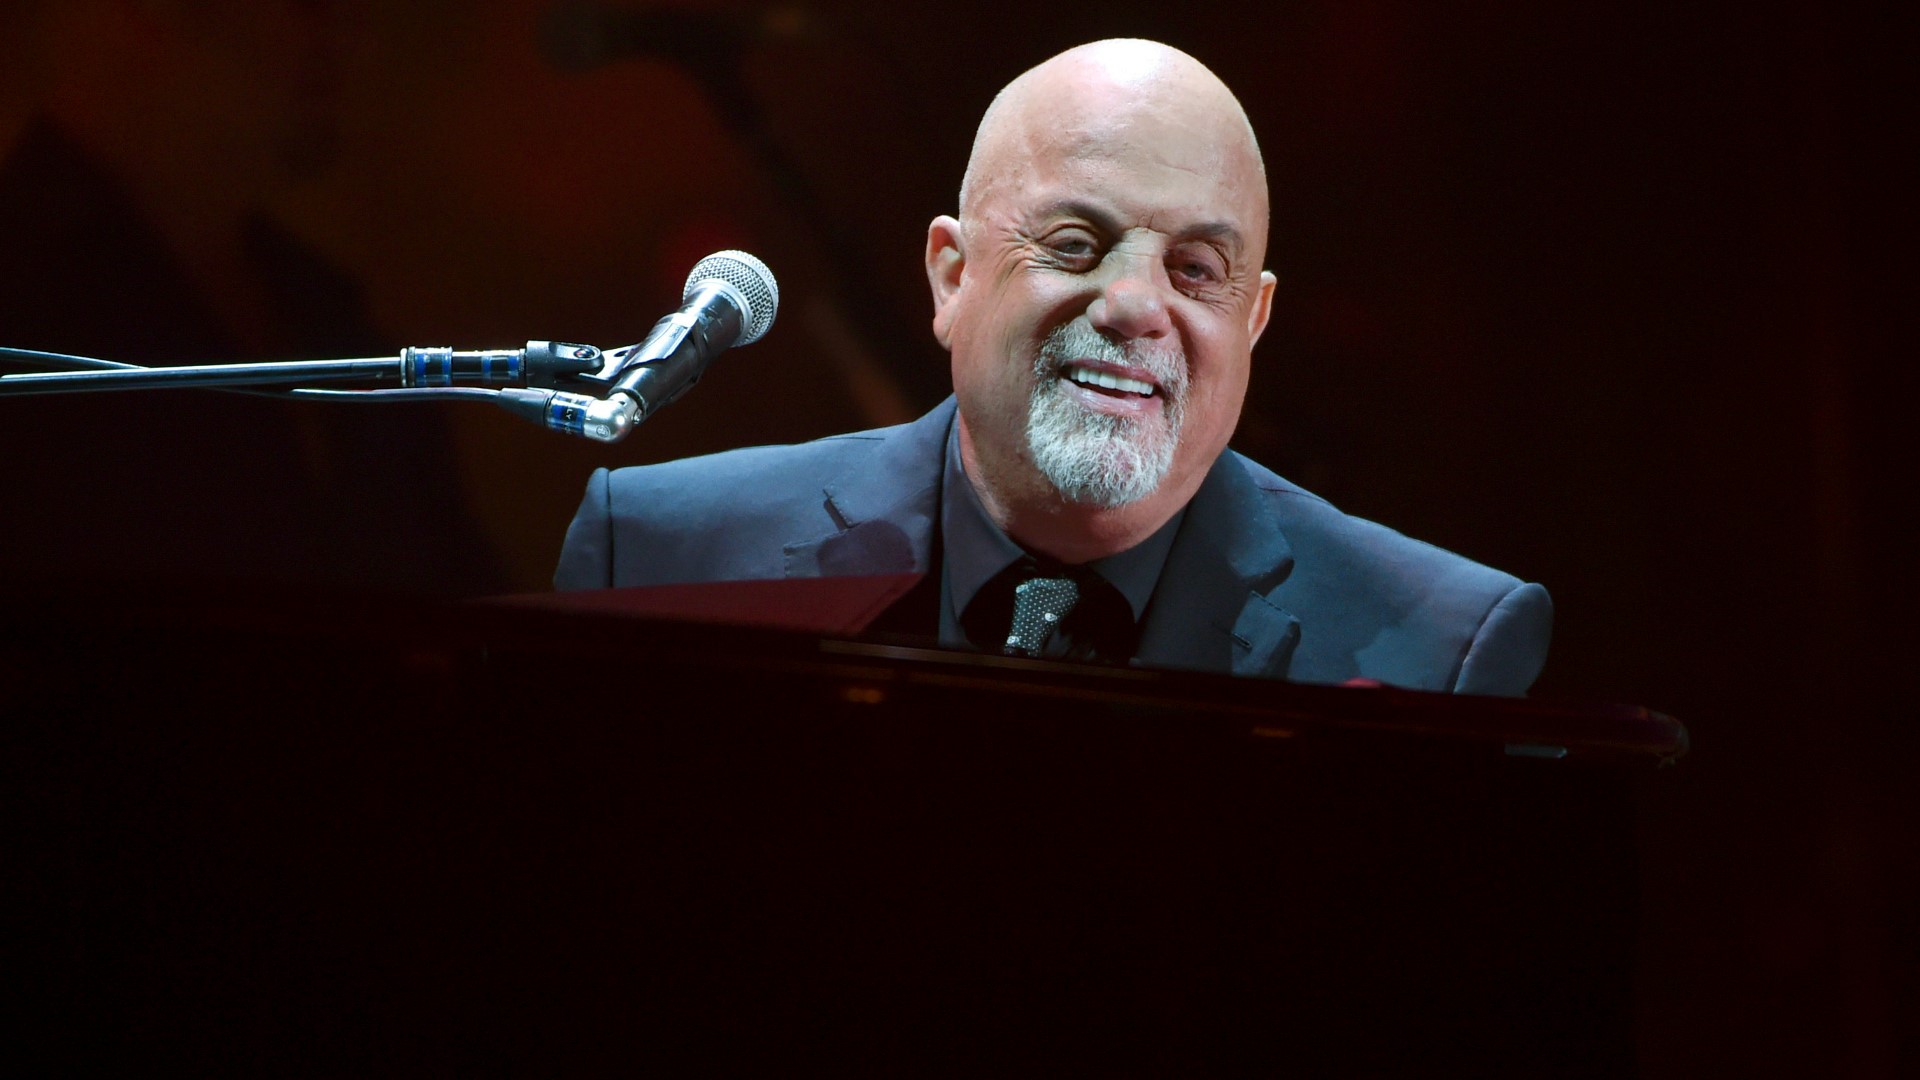 "Billy Joel: The 100th – Live at Madison Square Garden" will re-air in its entirety on CBS on Friday, April 19 at 9 p.m. EST.